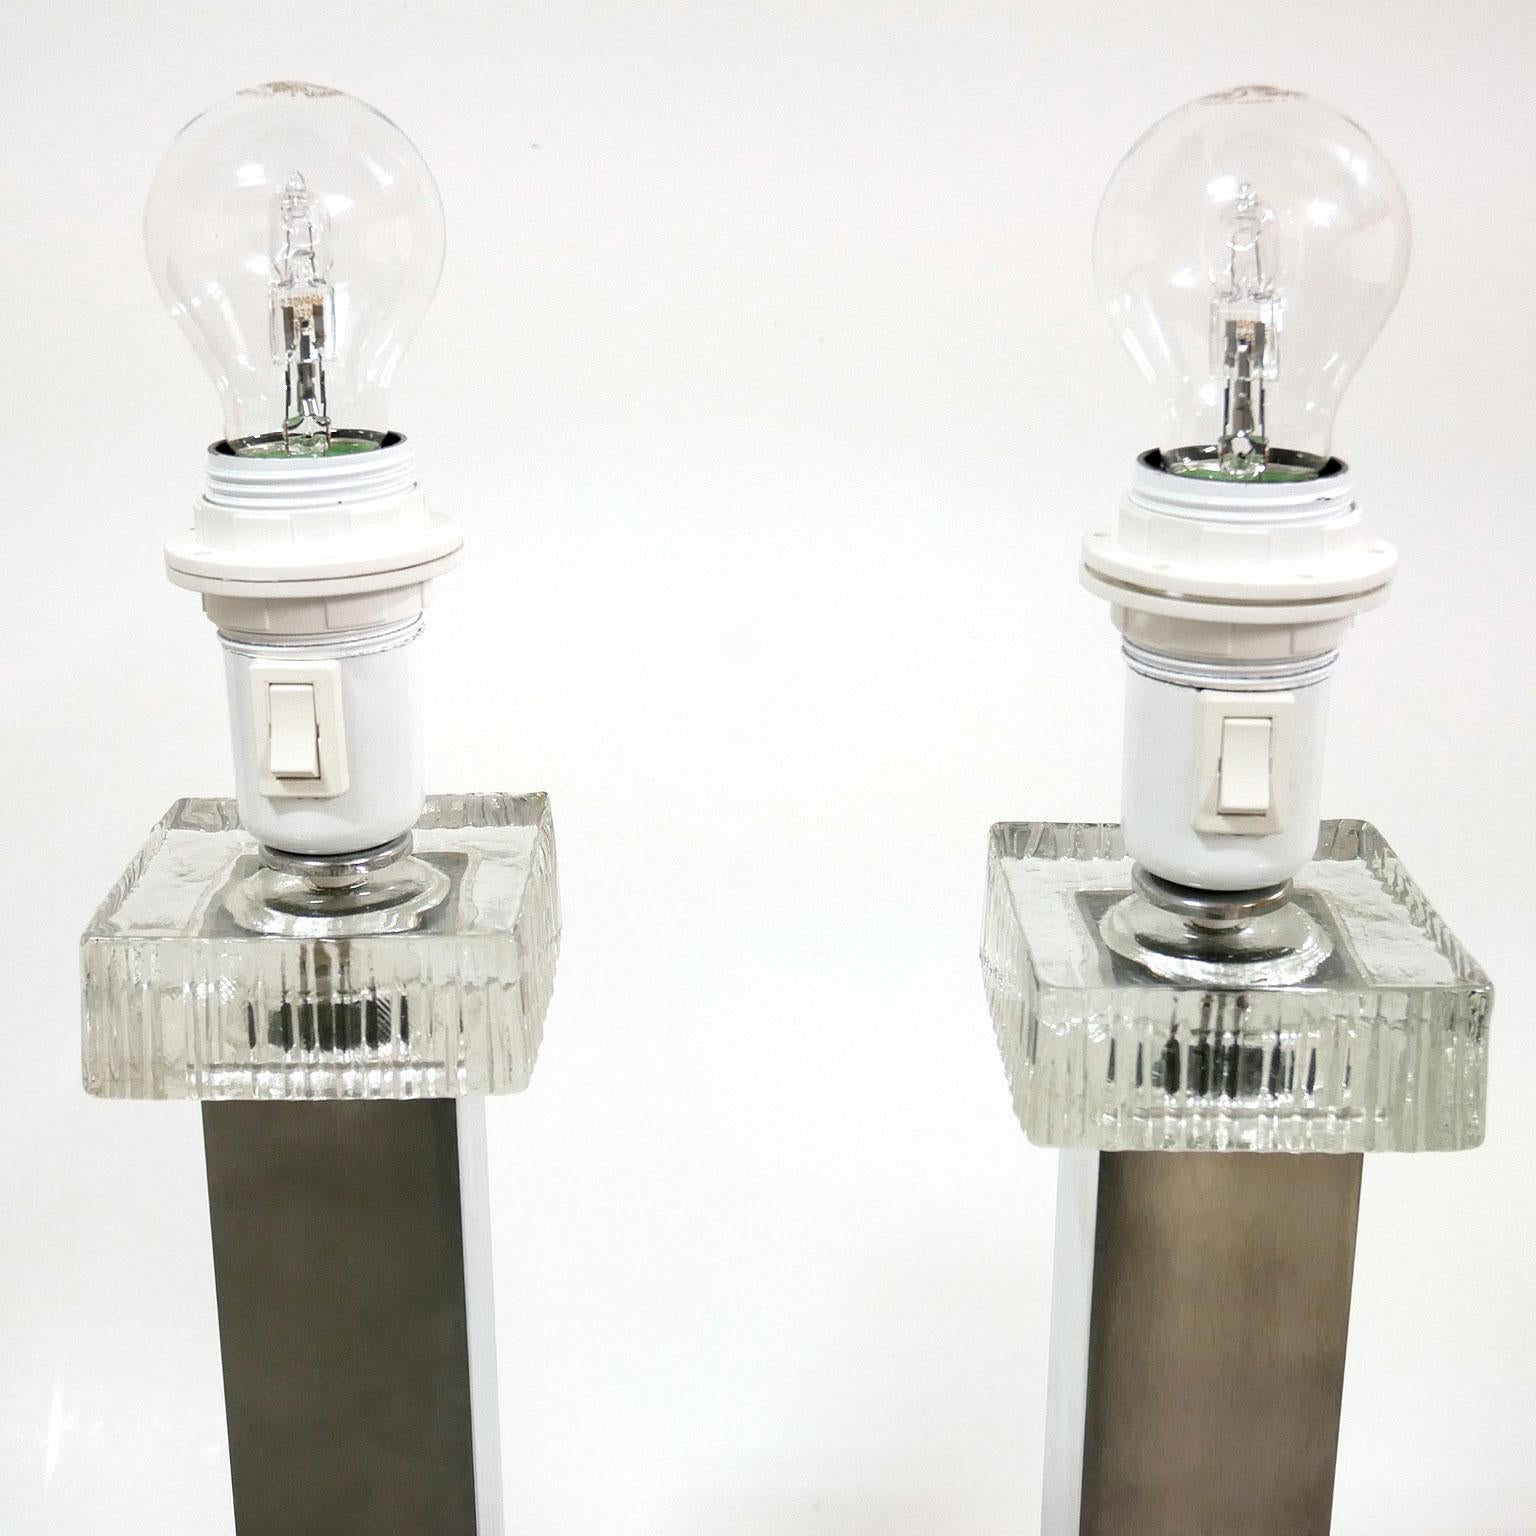 Beautiful Scandinavian table lamps in glass and brushed aluminium.
All electric parts is new.

Height including lamp socket: 47 cm / 18.5 inch.